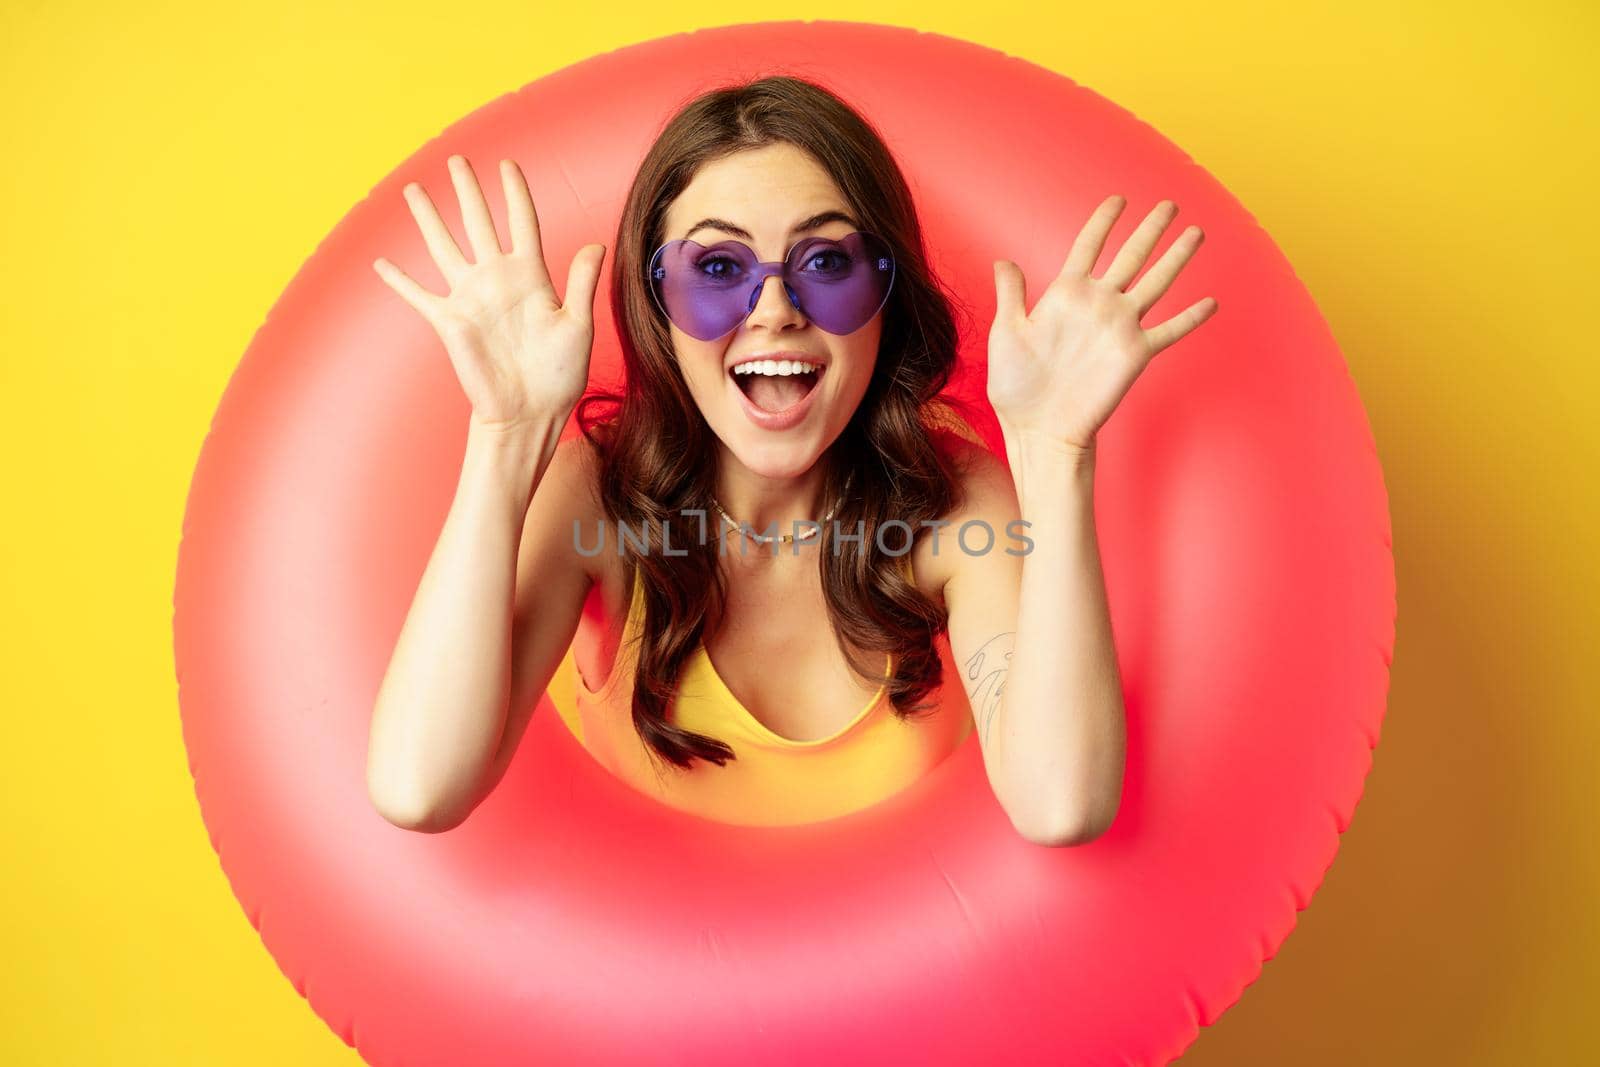 Close up portrait of enthusiastic young woman inside pink swimming ring, laughing and smiling, enjoying beach holiday, summer vacation, yellow background.